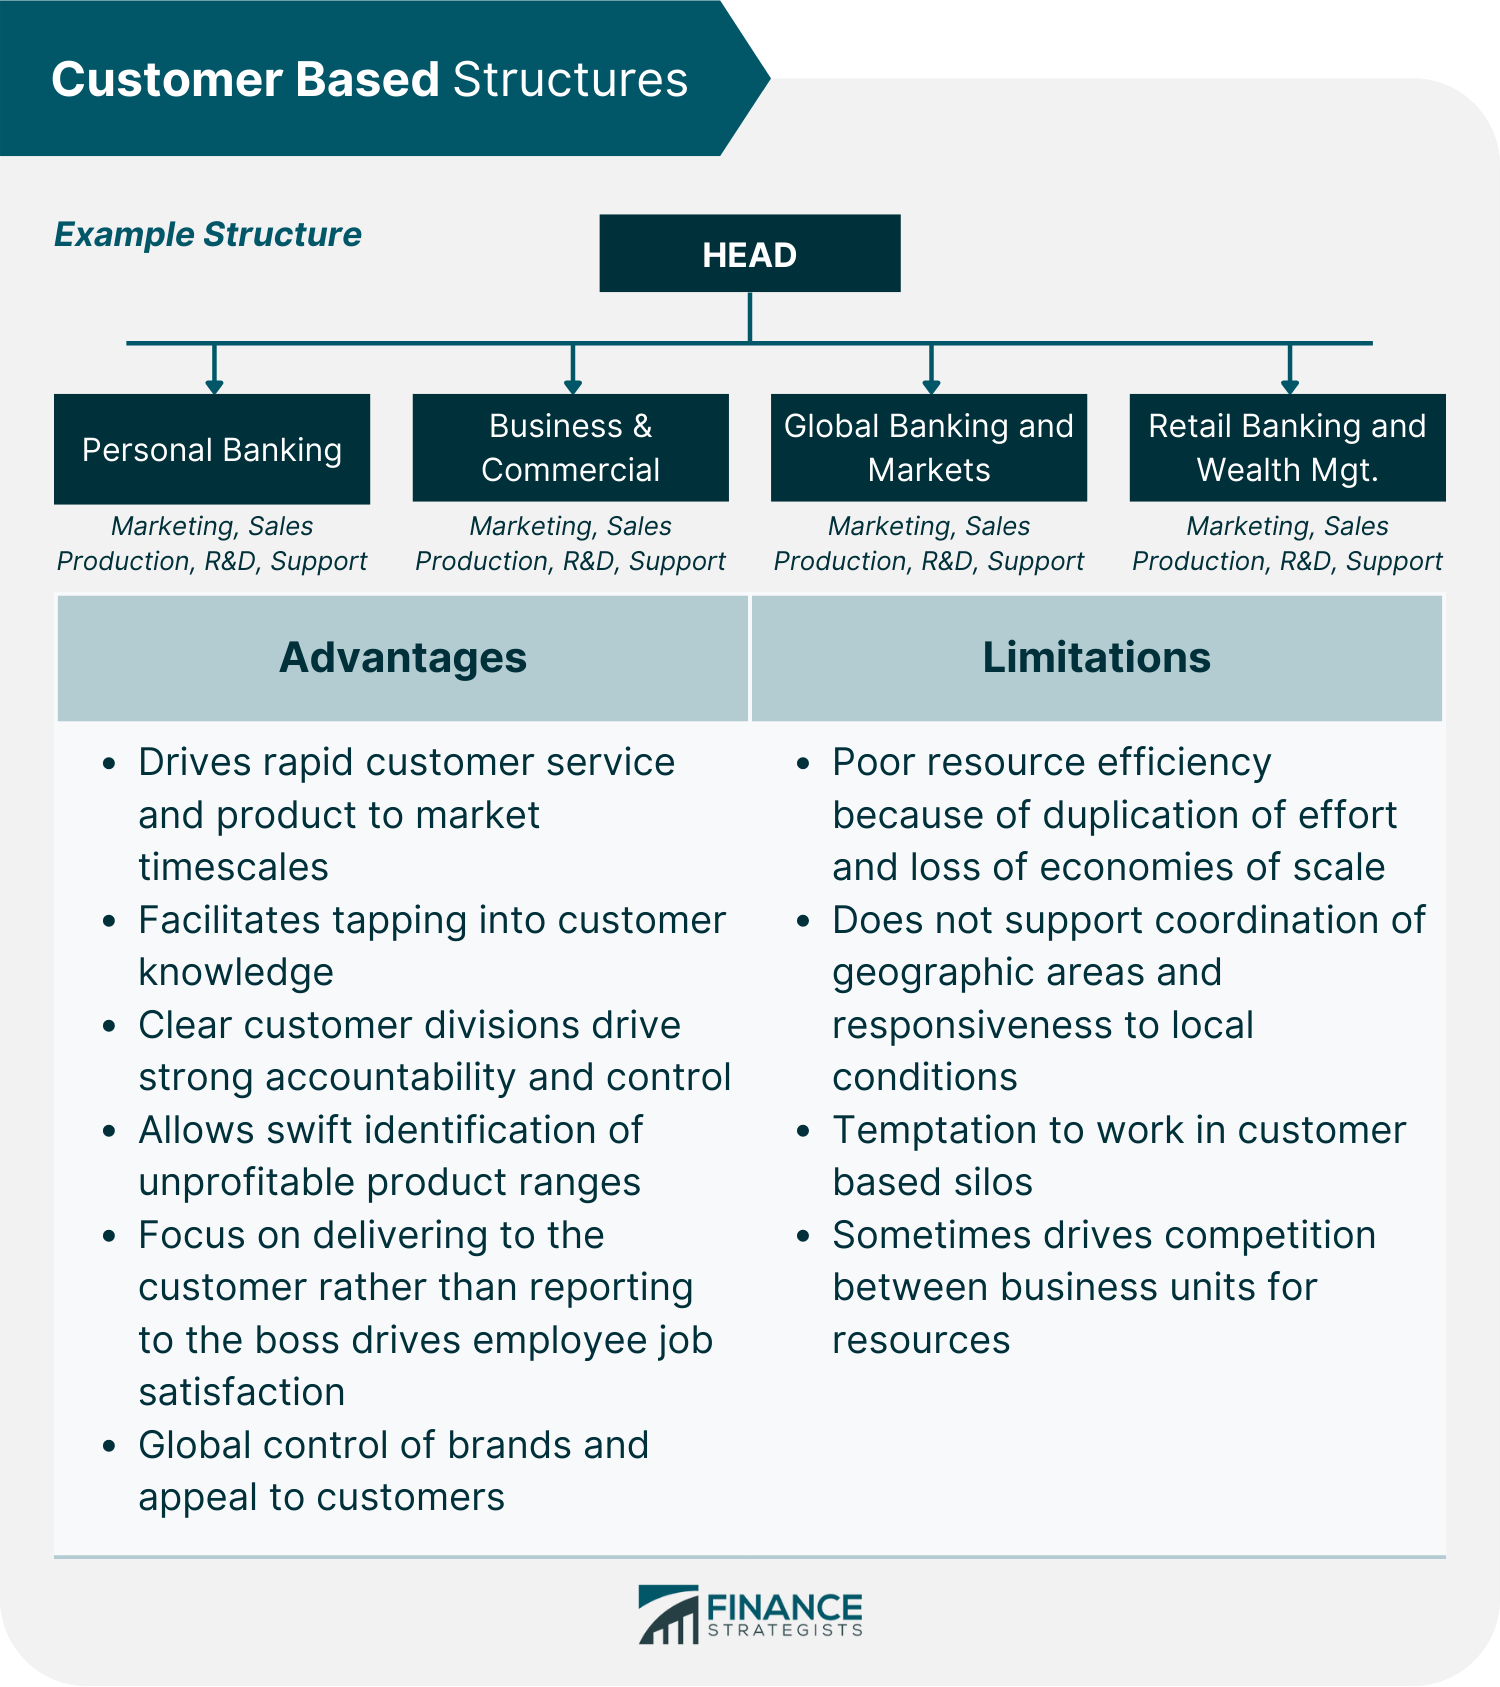 Customer Based Structures